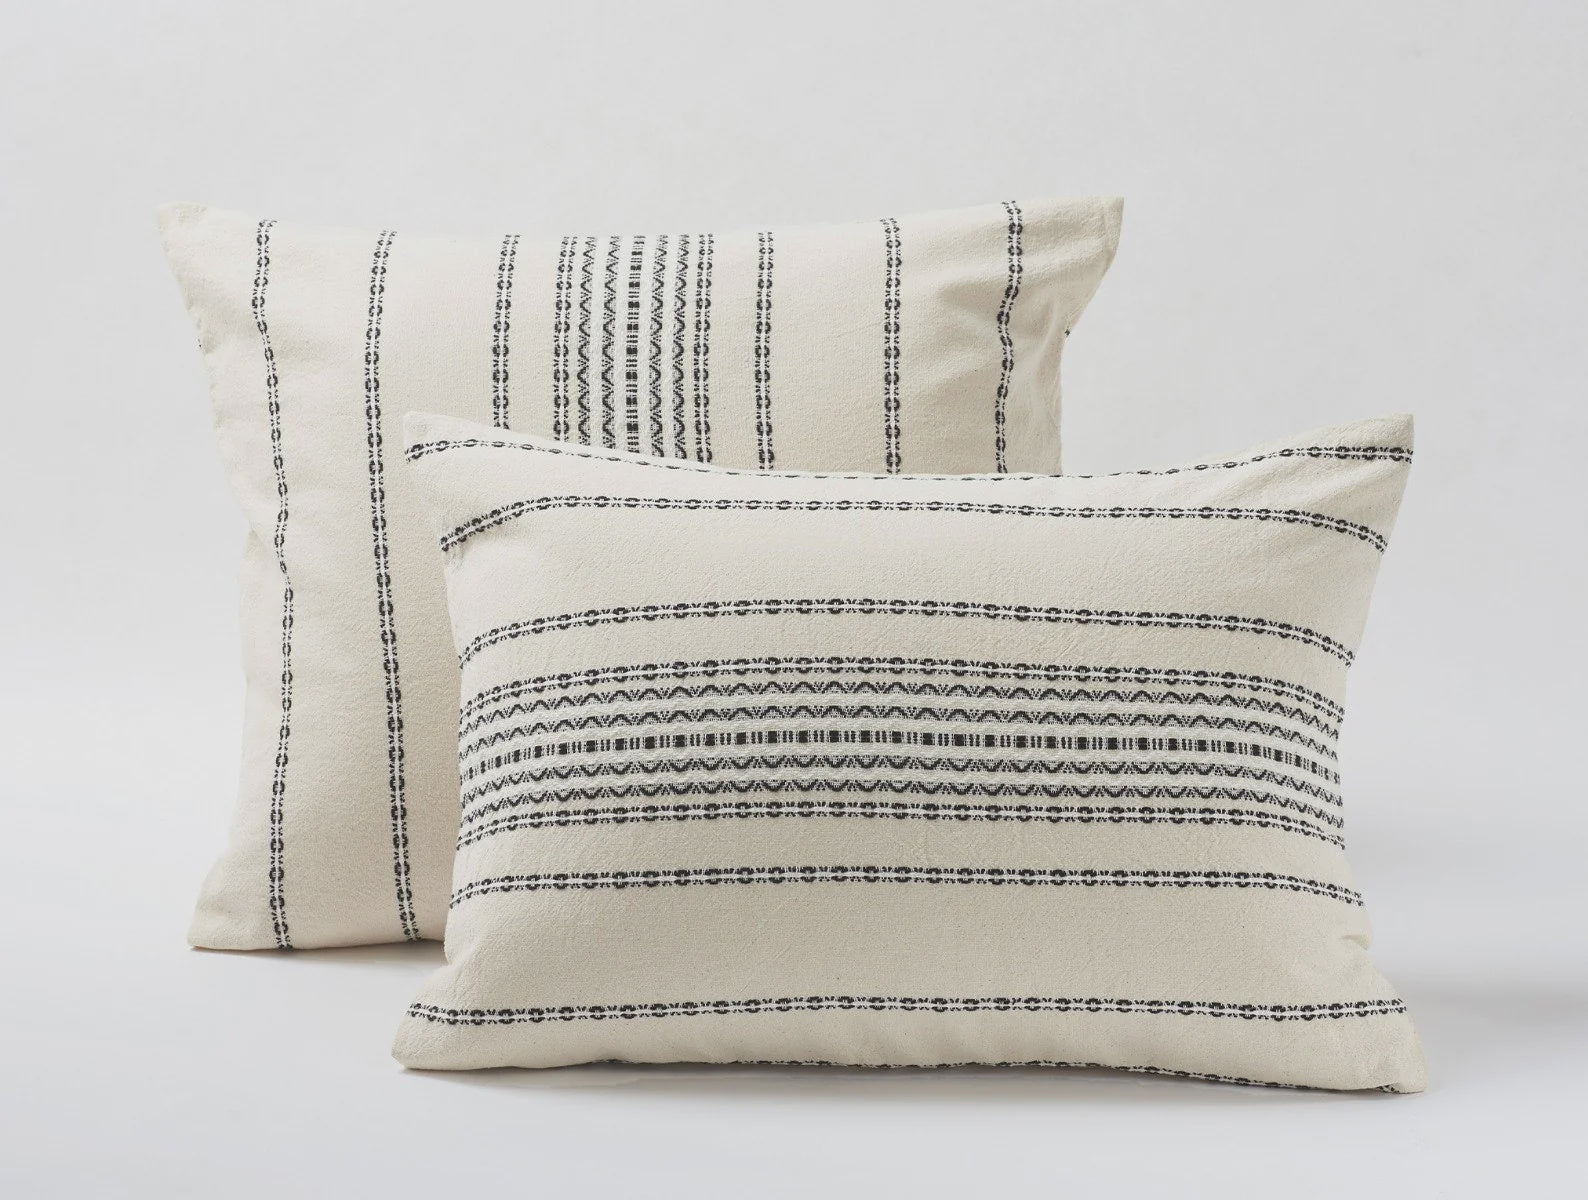 Two Rippled Black Stripe Euro Ivory pillows featuring intricate black and gray patterns on a cream background, set in a bungalow-style room with a light gray studio backdrop from Coyuchi Inc.